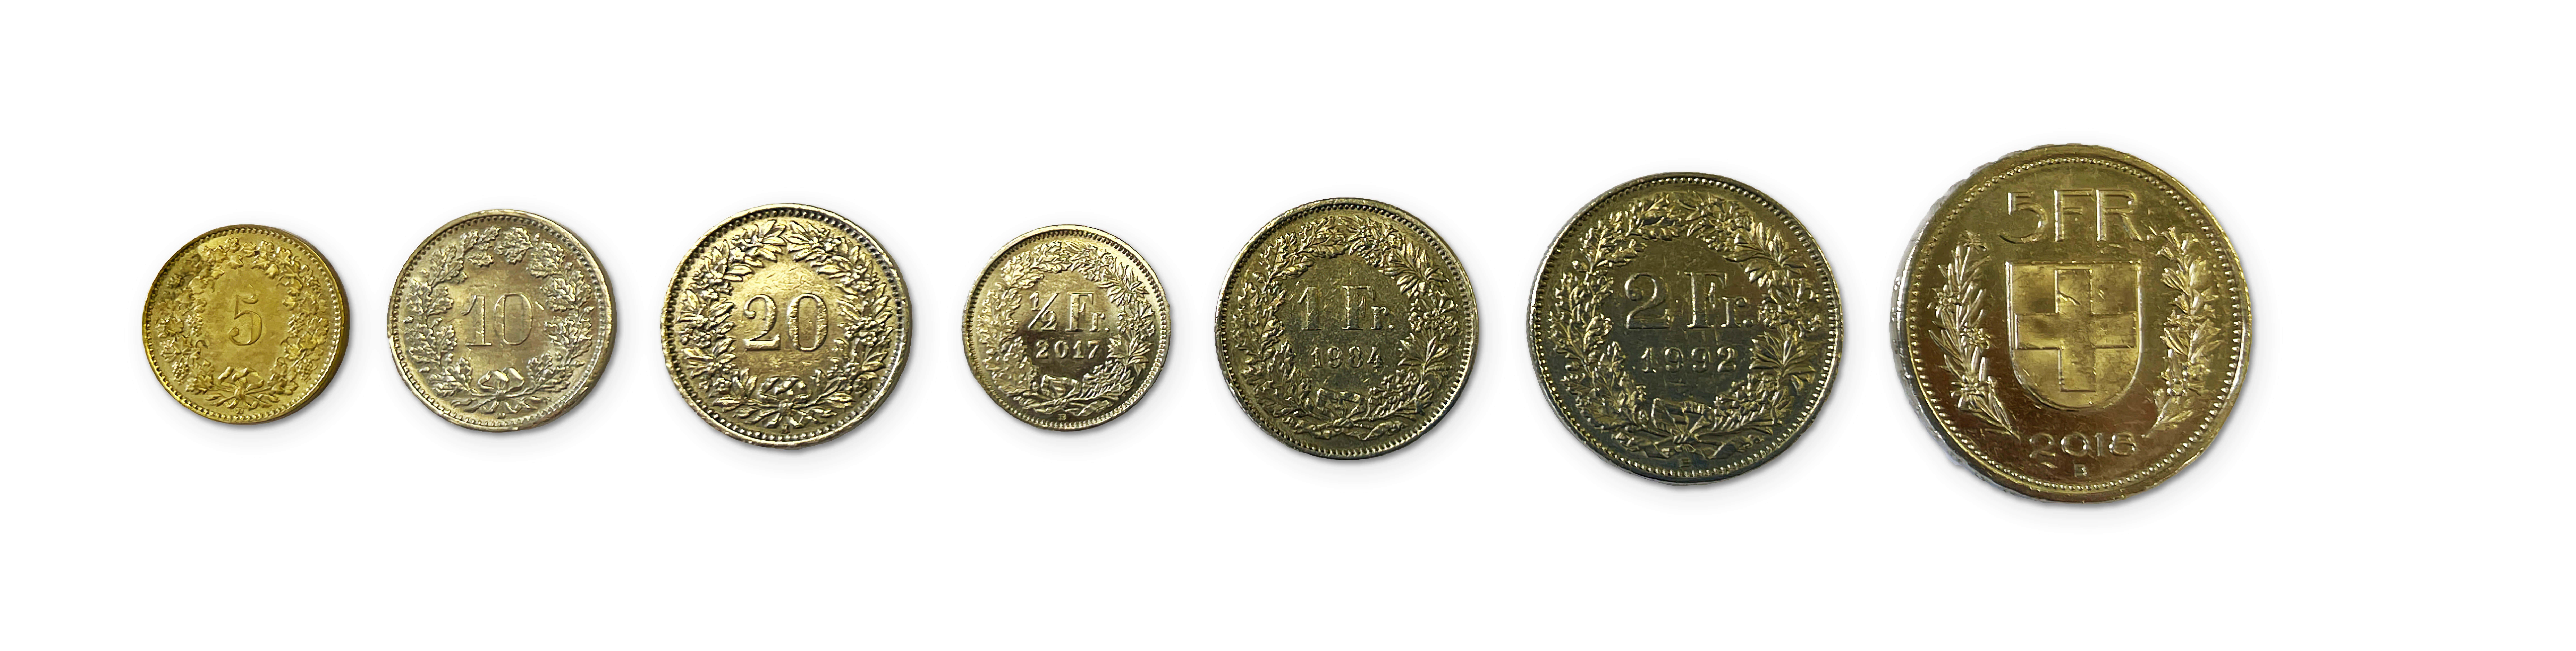 All Swiss Francs coins